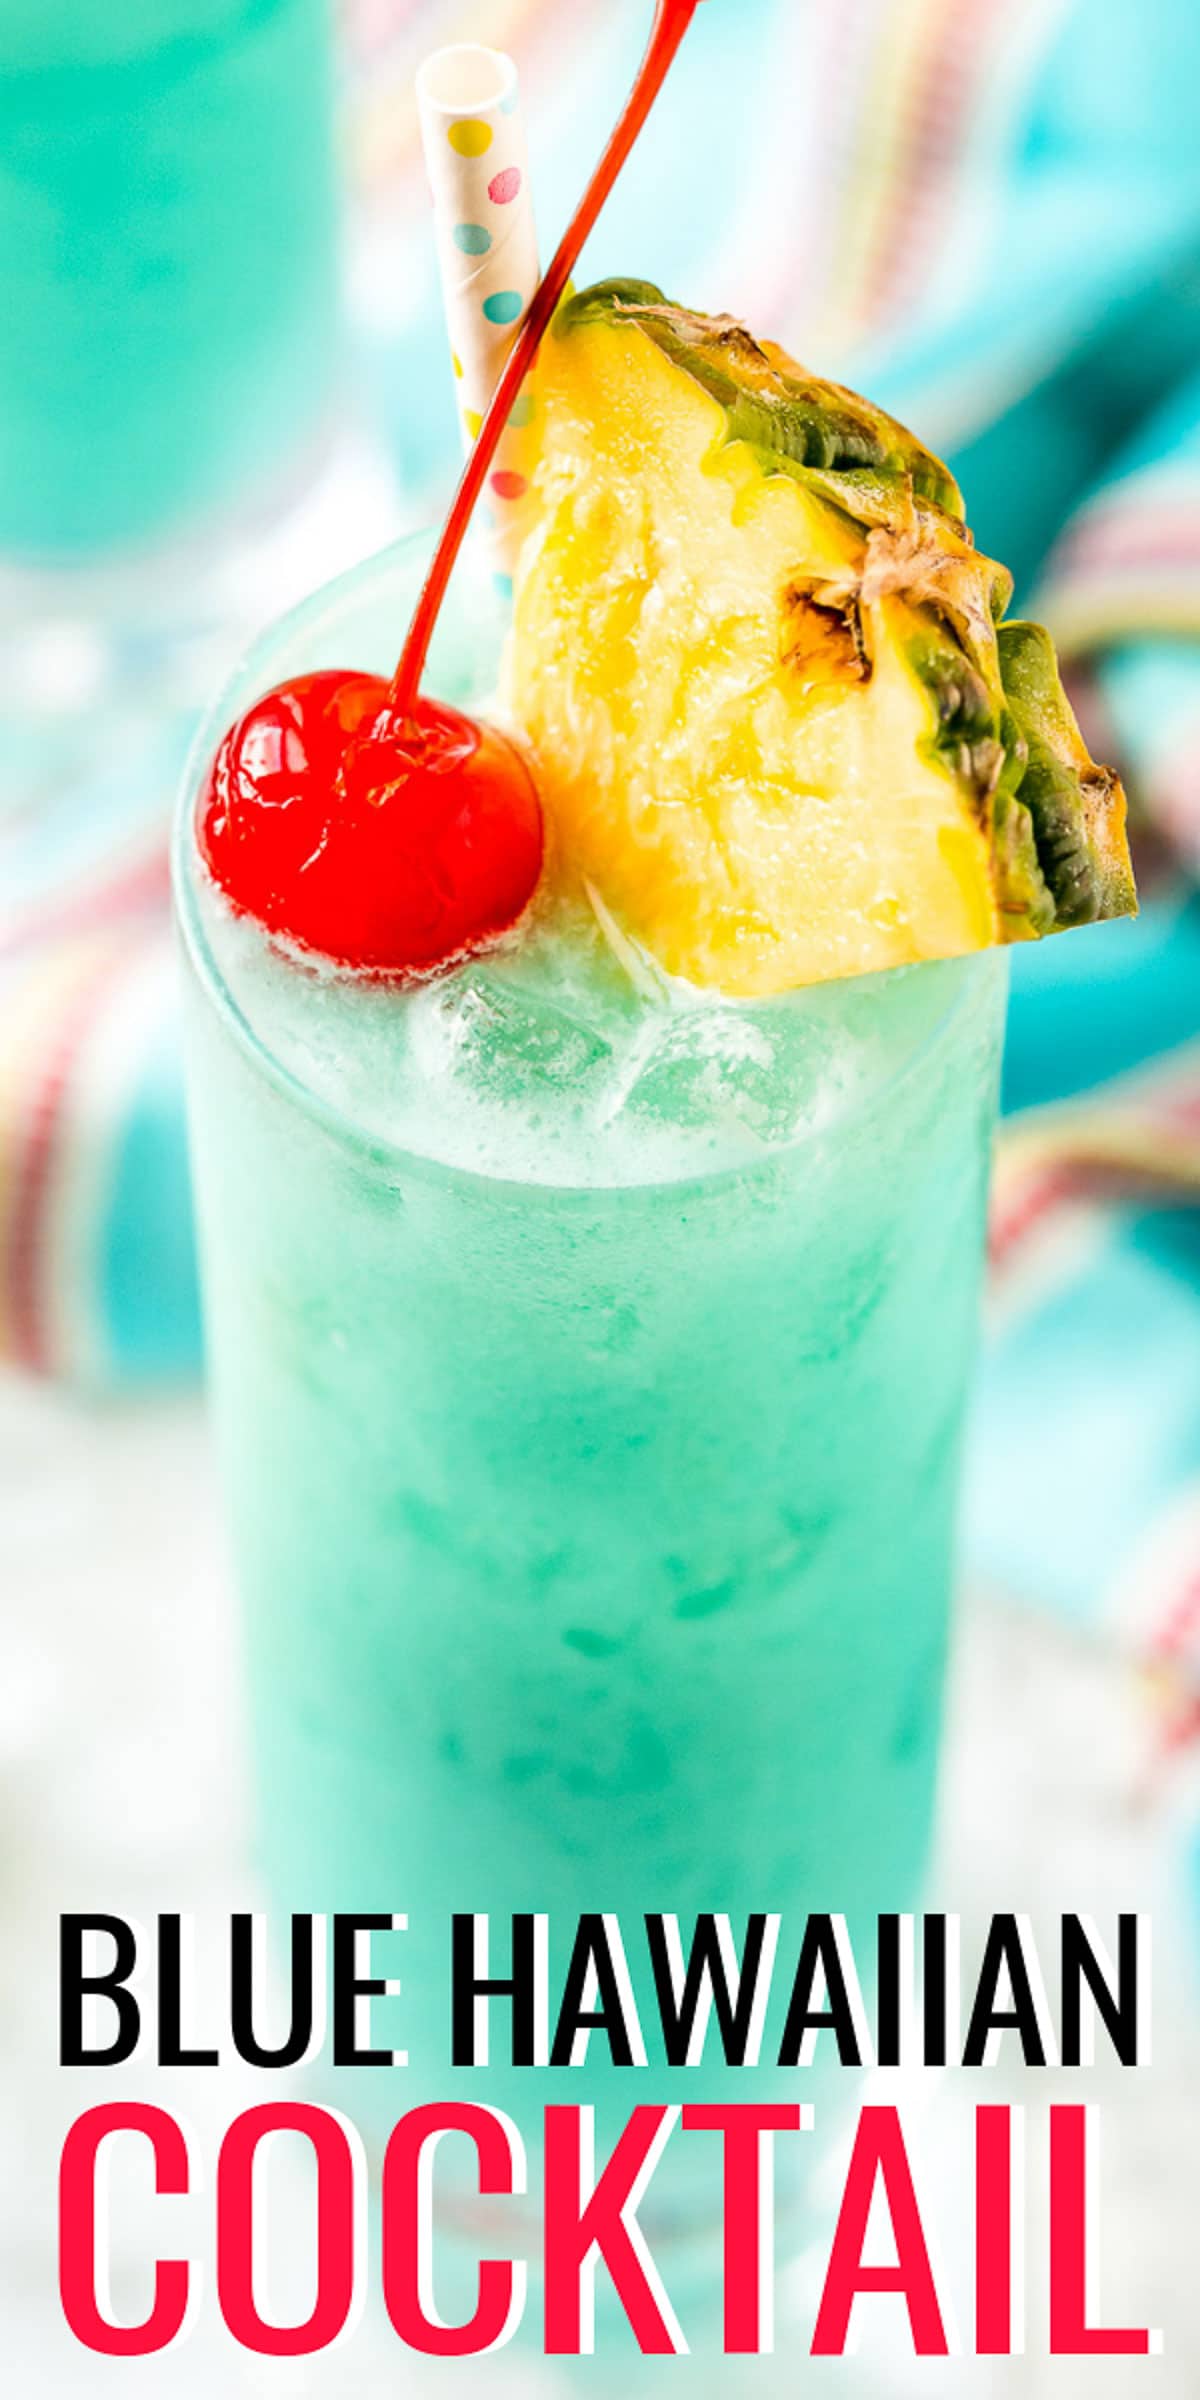 Blue Hawaiian Cocktail is a tropical drink recipe made with rum, blue curaçao, coconut cream, and pineapple juice. Serve it on the rocks or frozen - either way, it's delicious! via @sugarandsoulco